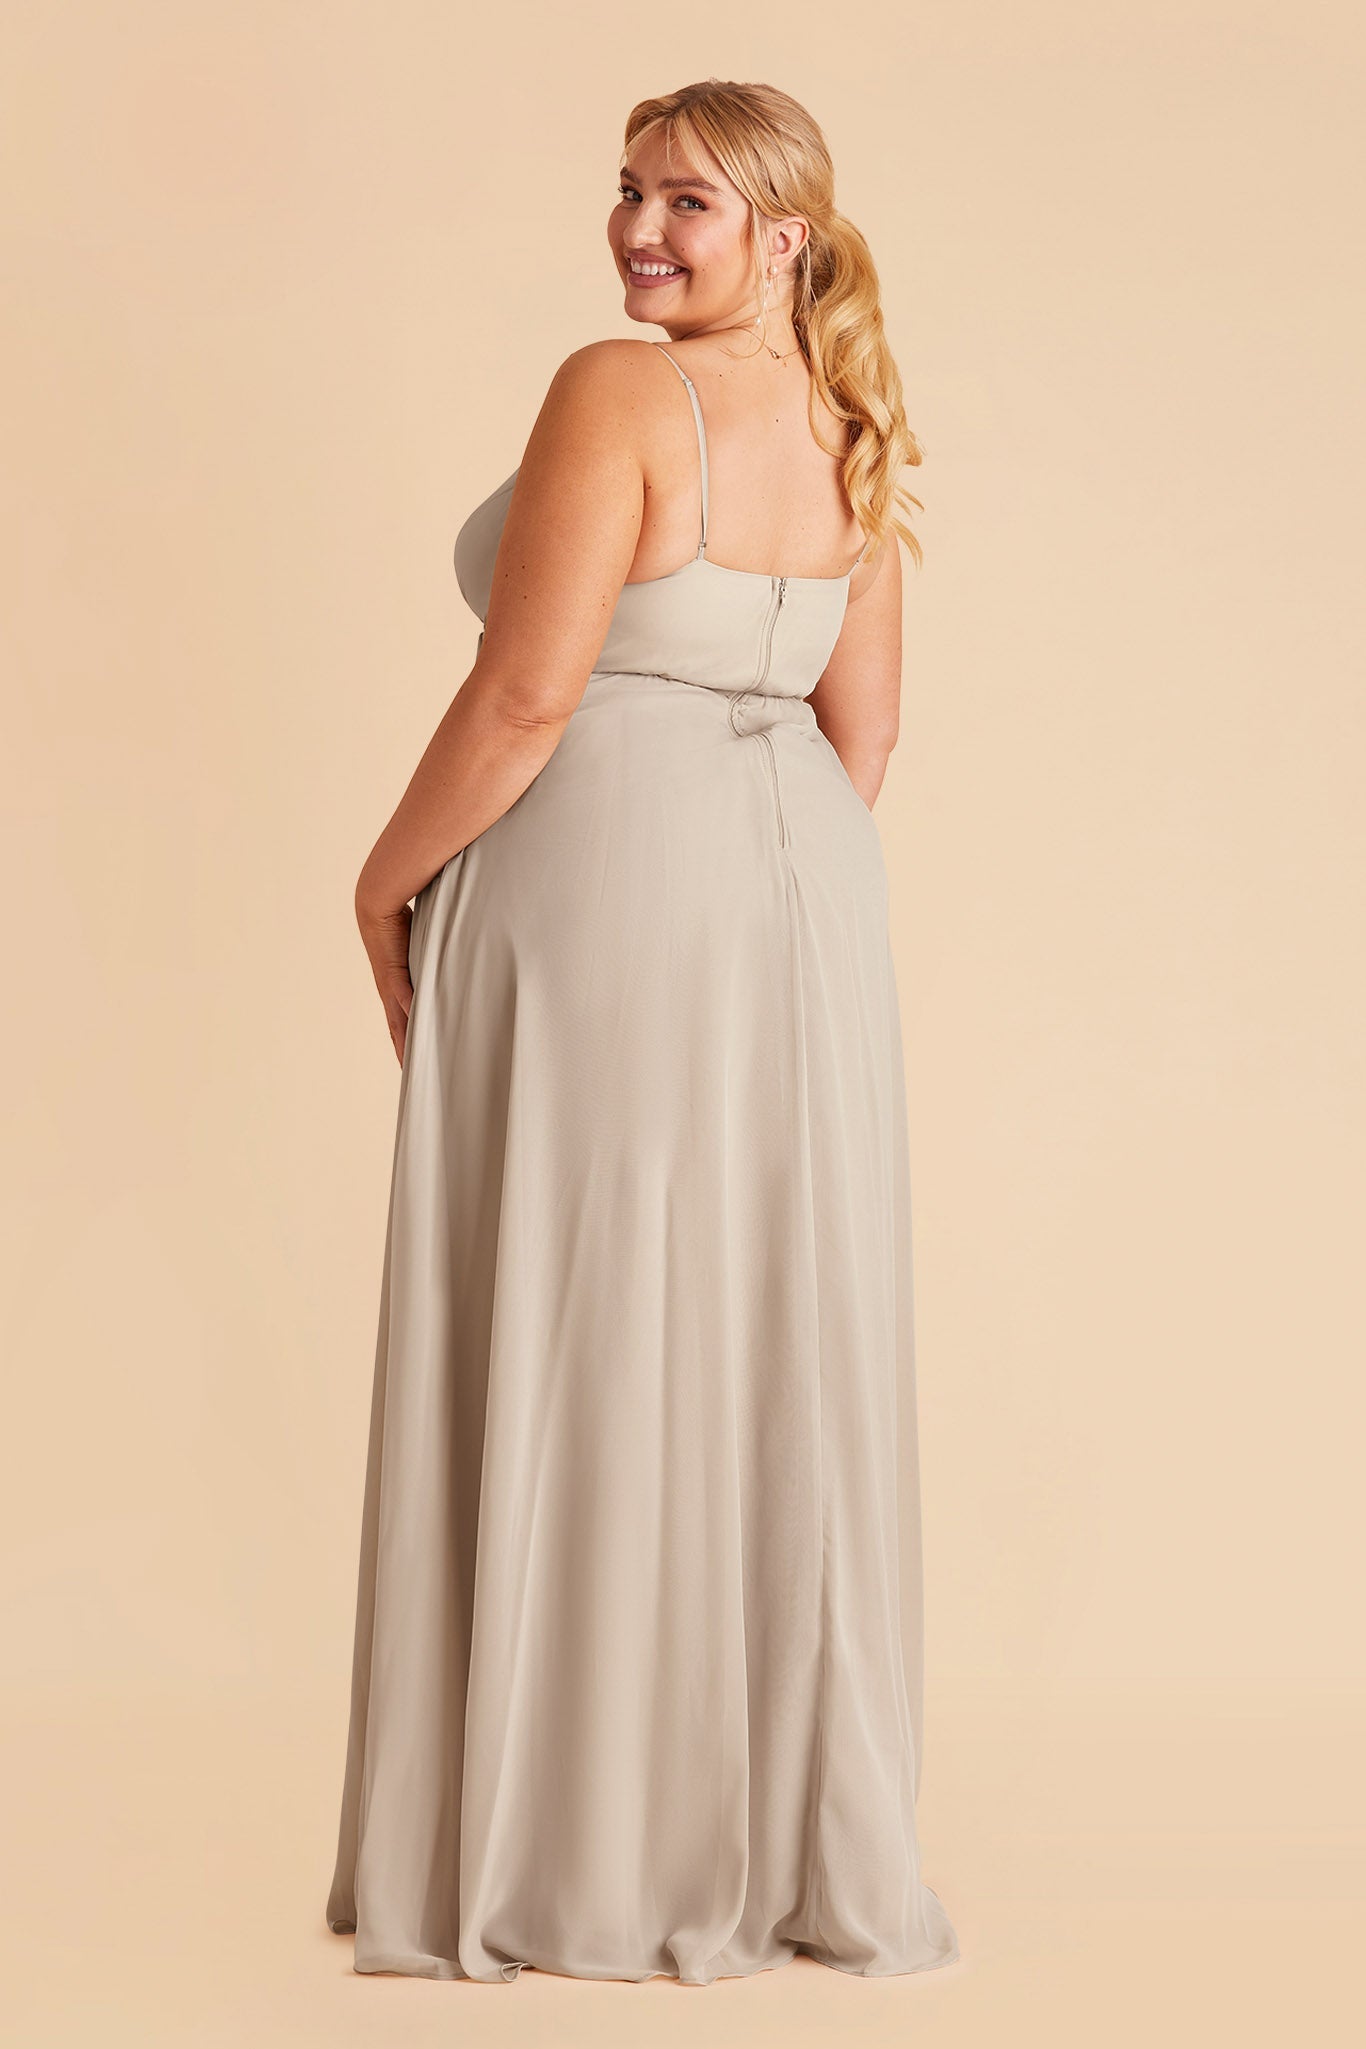 Kaia plus size bridesmaids dress in neutral champagne chiffon by Birdy Grey, side view